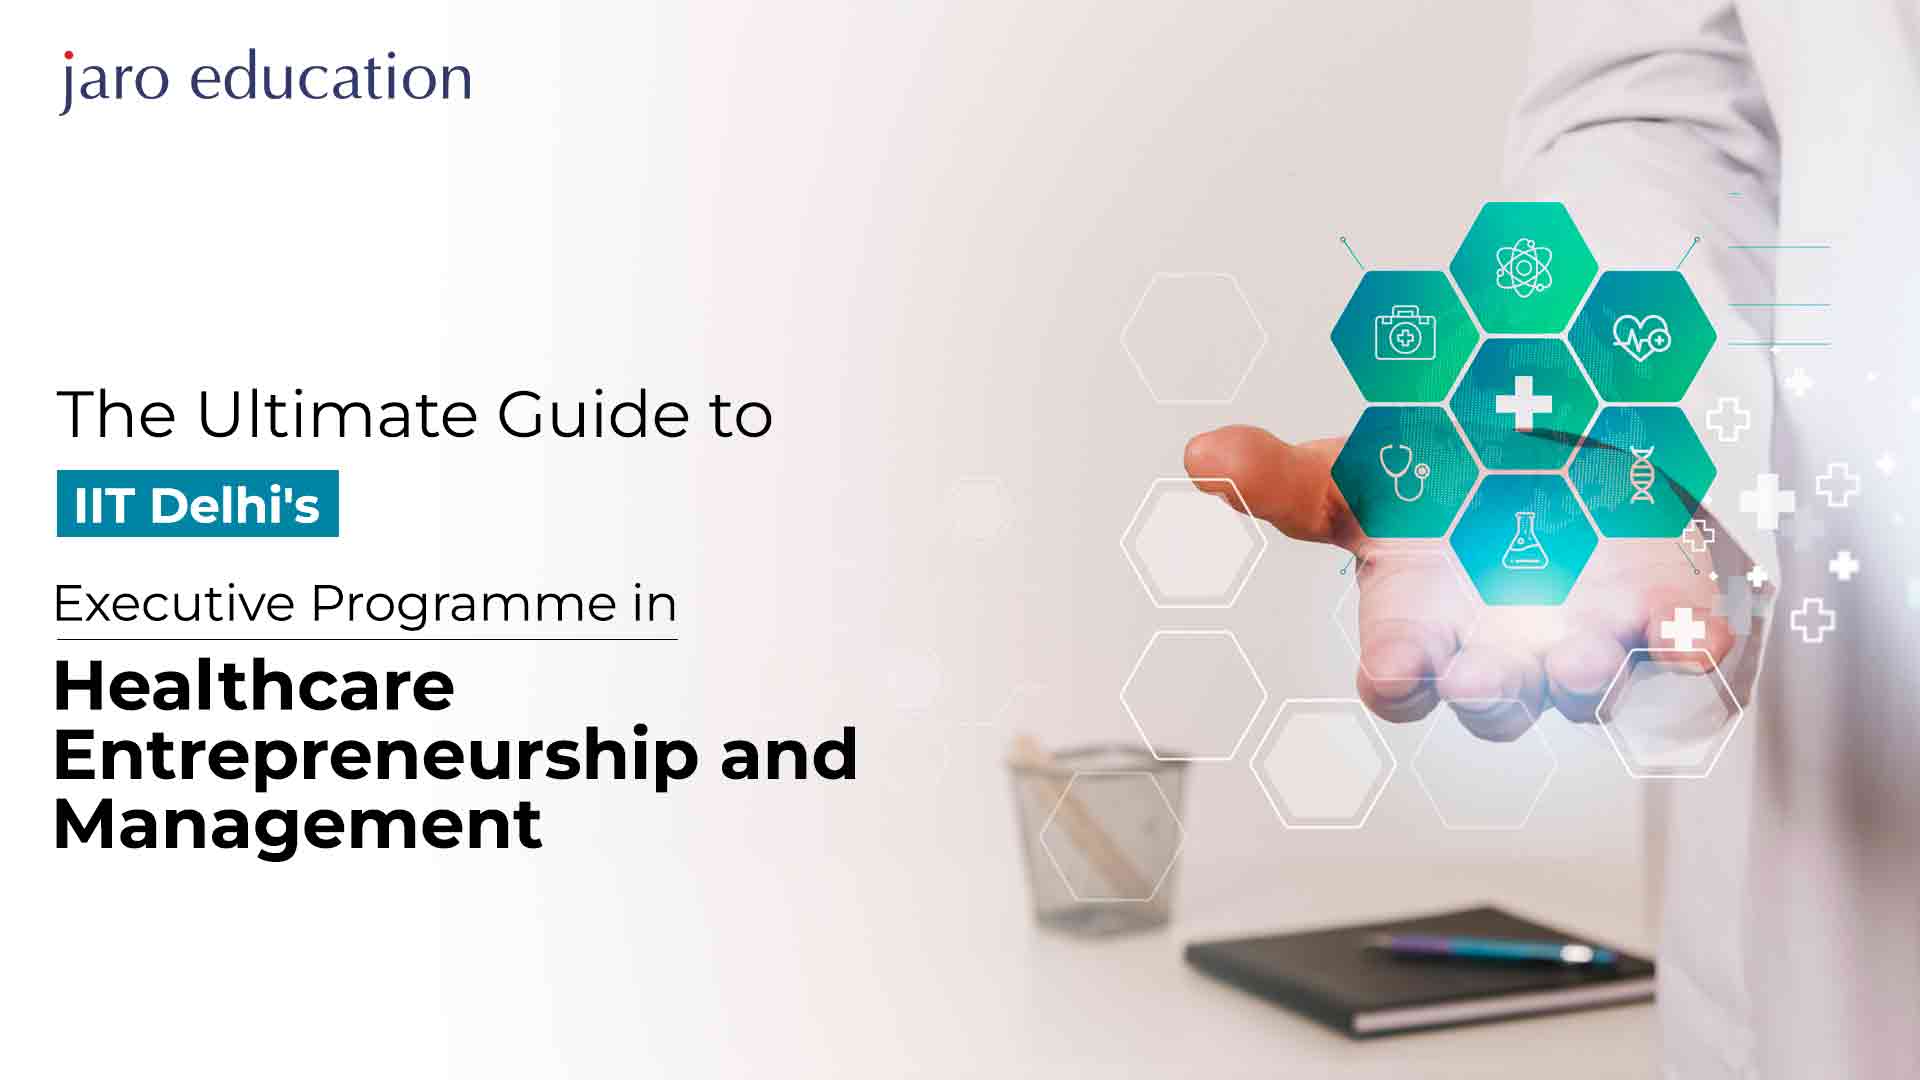 The Ultimate Guide to IIT Delhi's Executive Programme in Healthcare Entrepreneurship and Management jaro